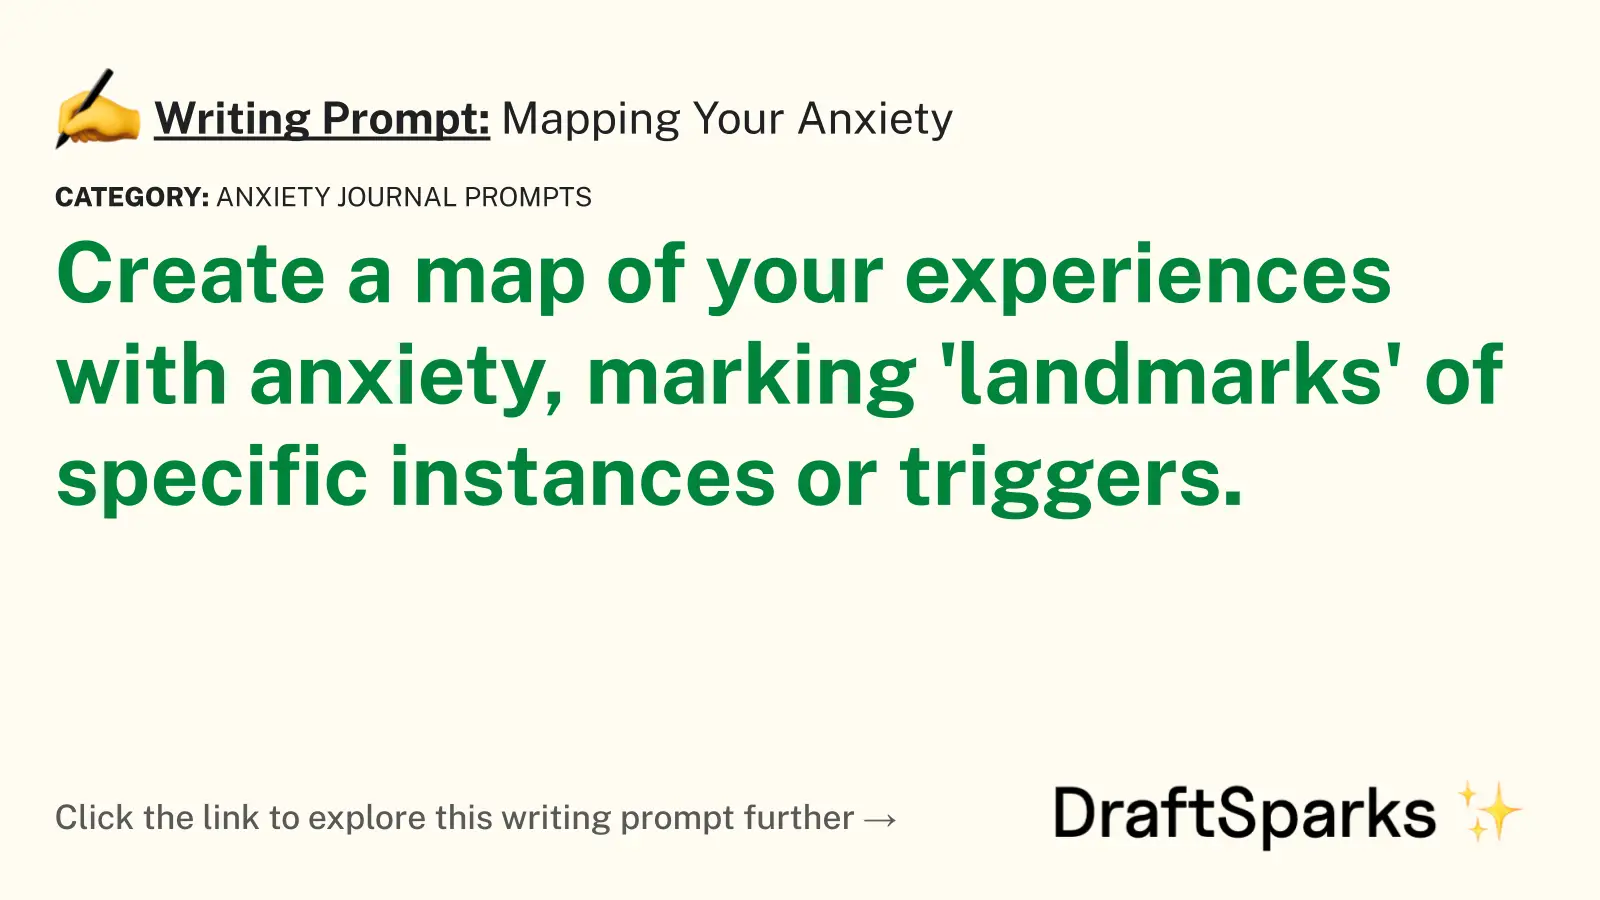 Mapping Your Anxiety